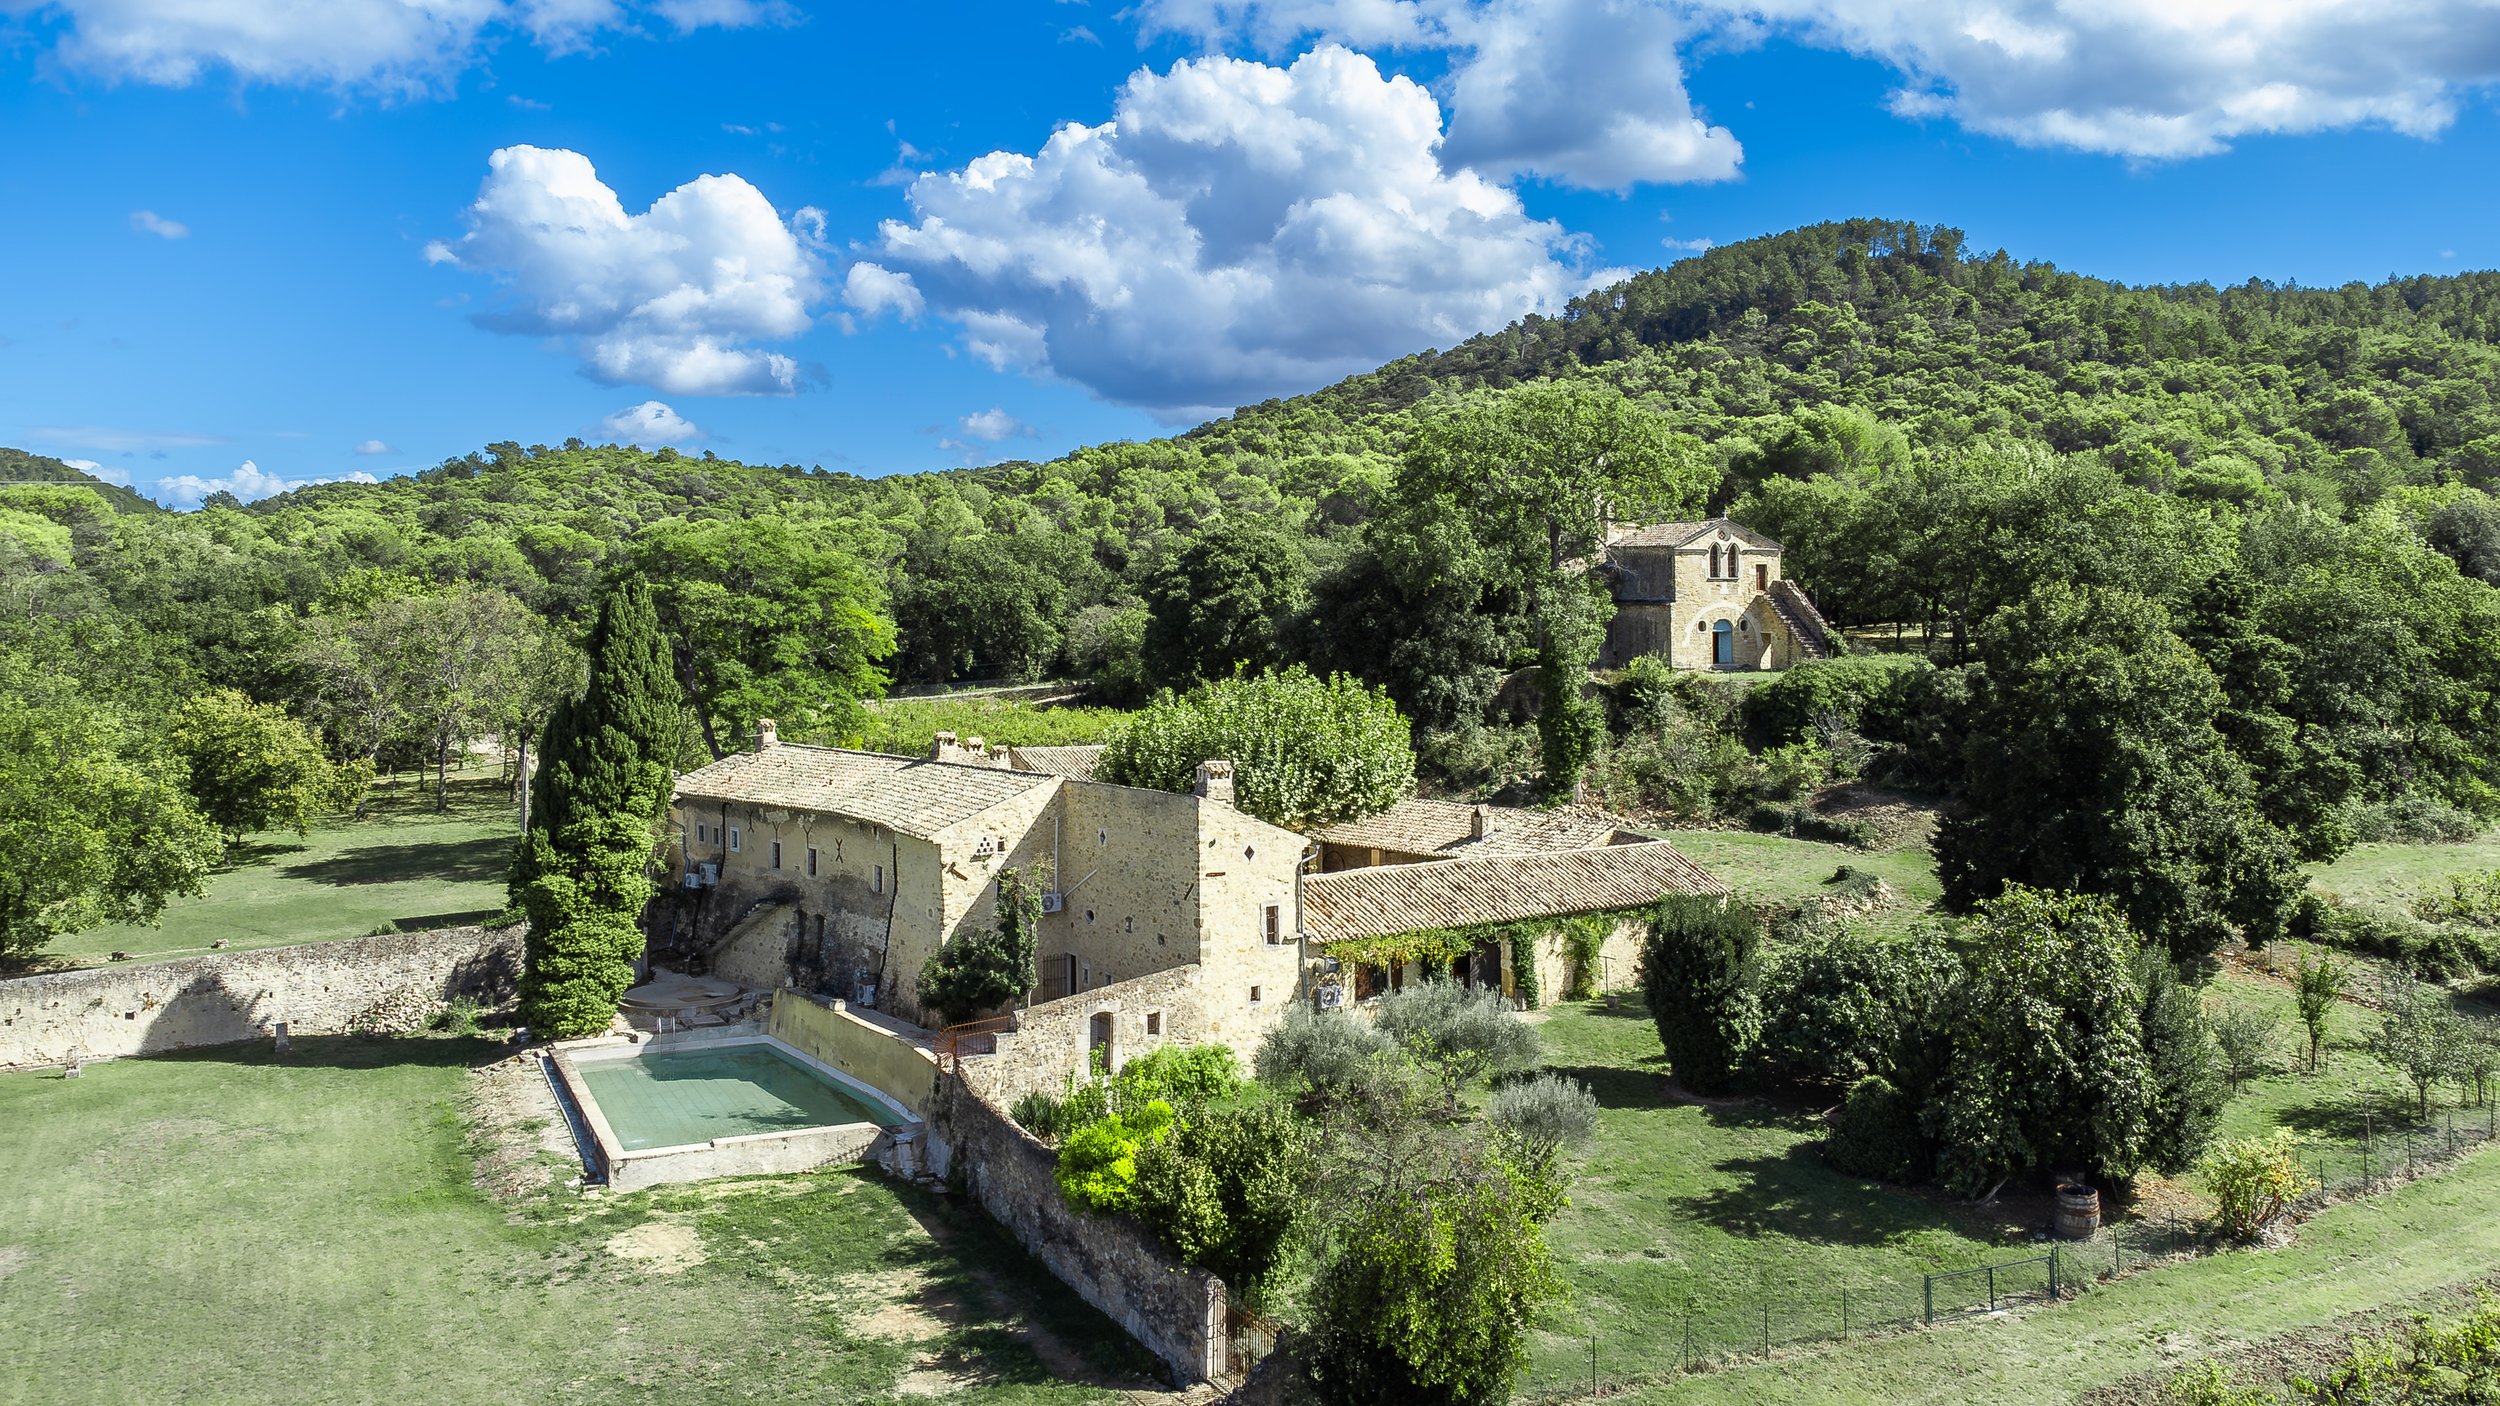 Francis+York+Renovated Historic Residence and 98 Acre Estate in Provence, France  00007.jpg